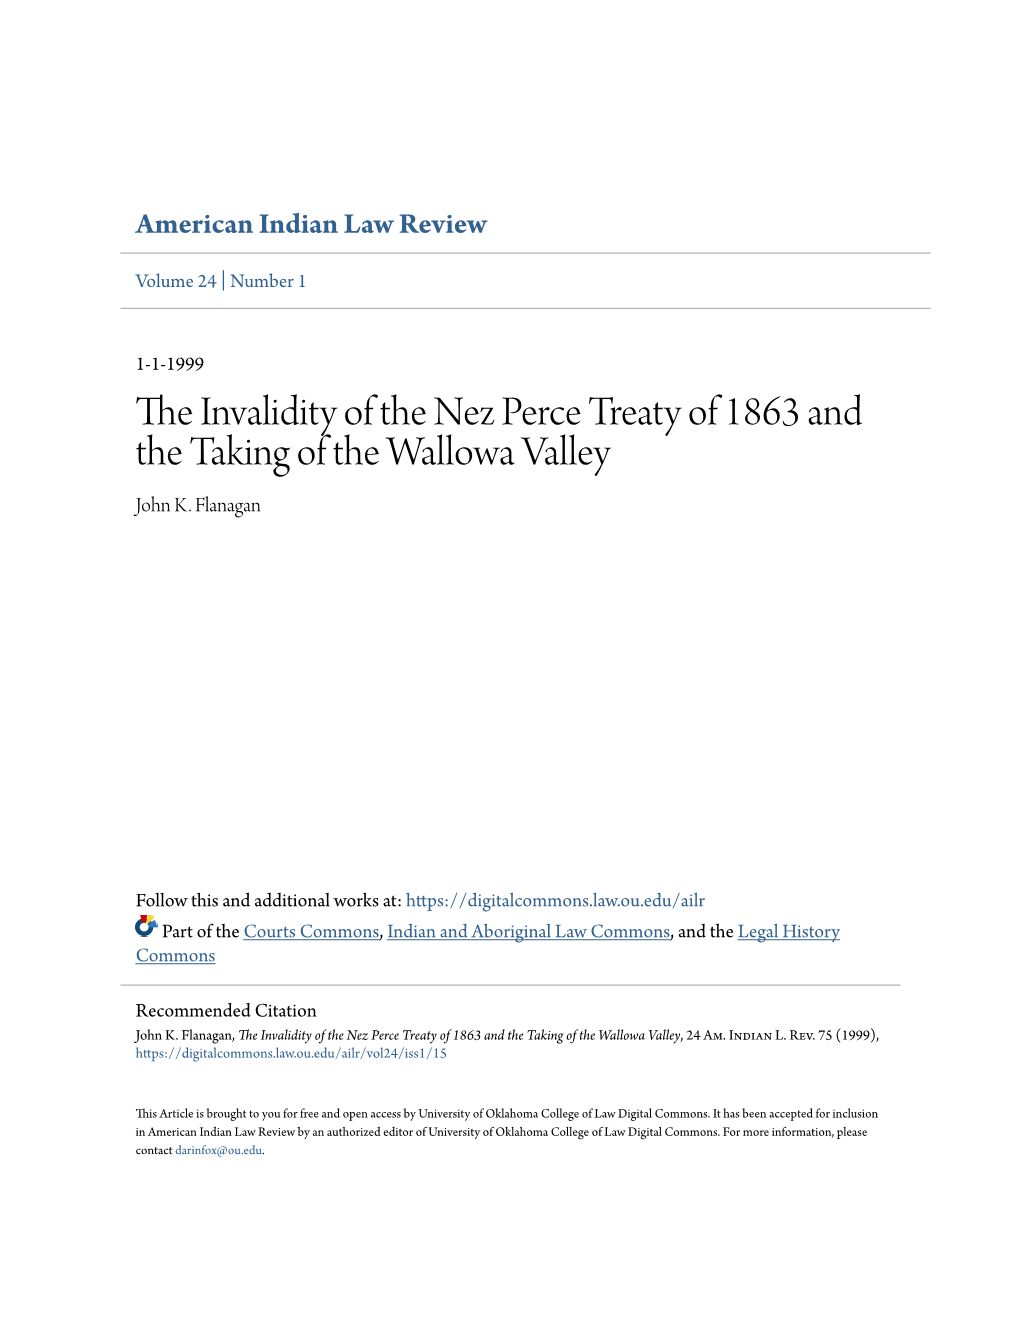 The Invalidity of the Nez Perce Treaty of 1863 and the Taking of the Wallowa Valley, 24 Am